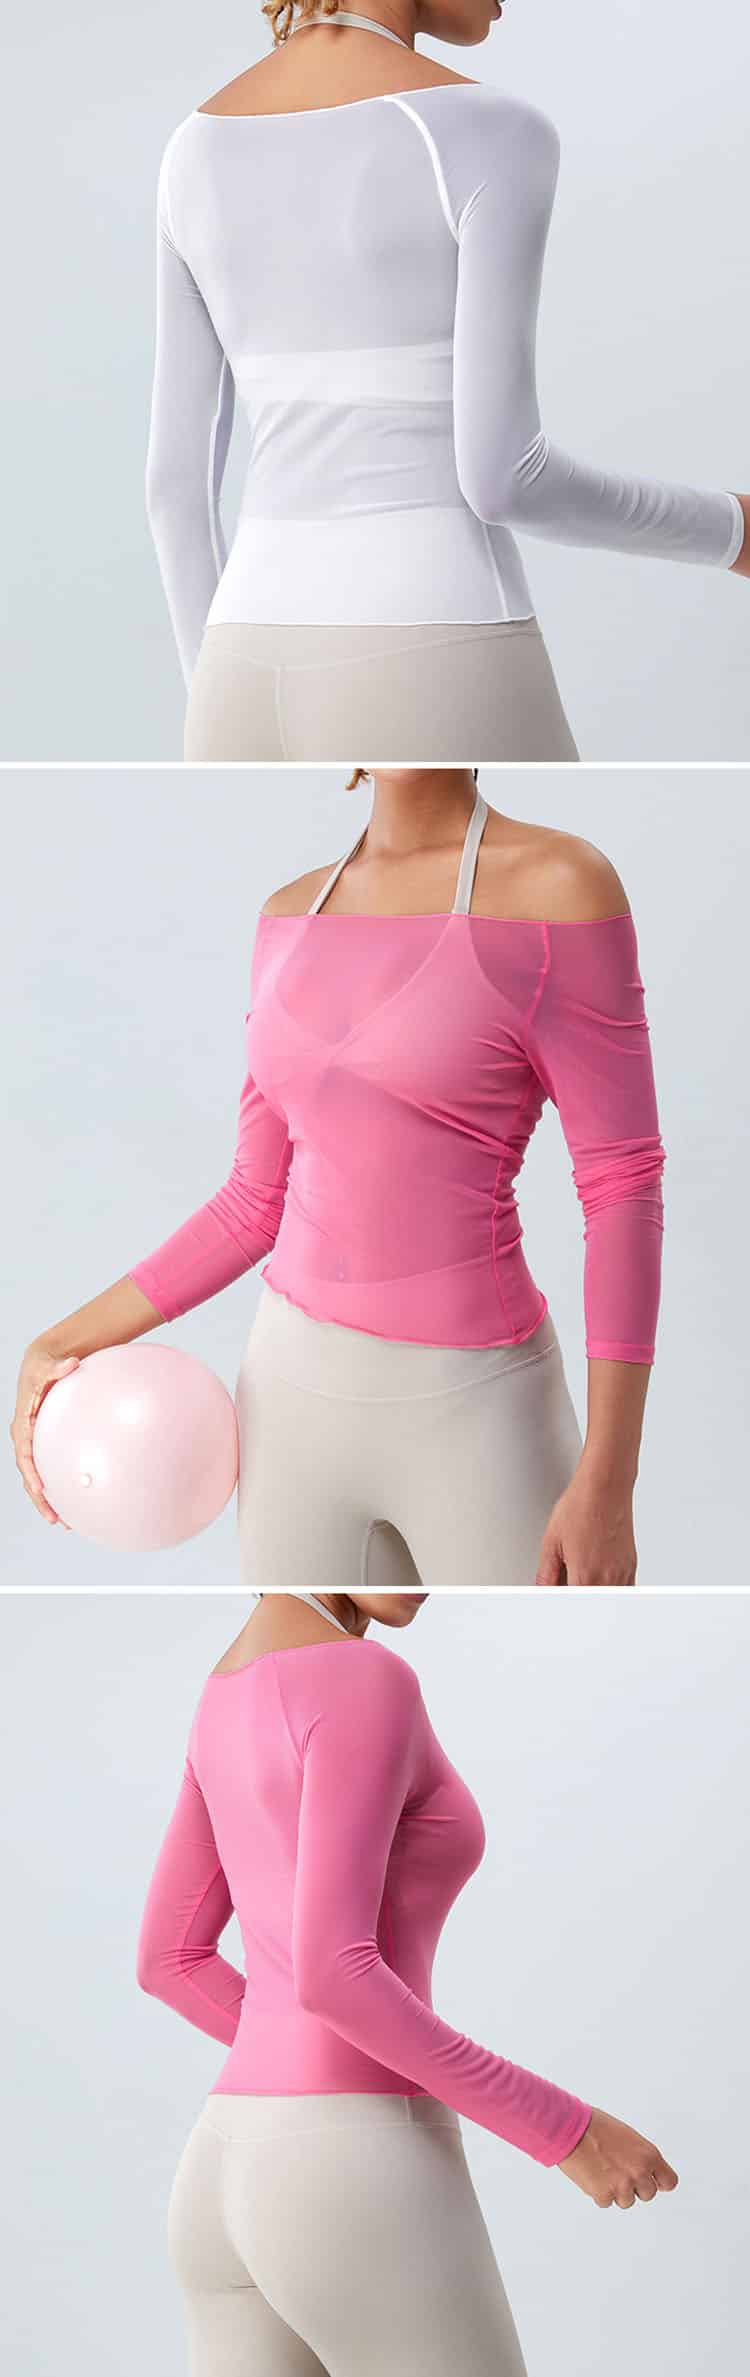 Made of high-quality fabric, moisture-wicking and sweat-wicking for a smooth exercise experience